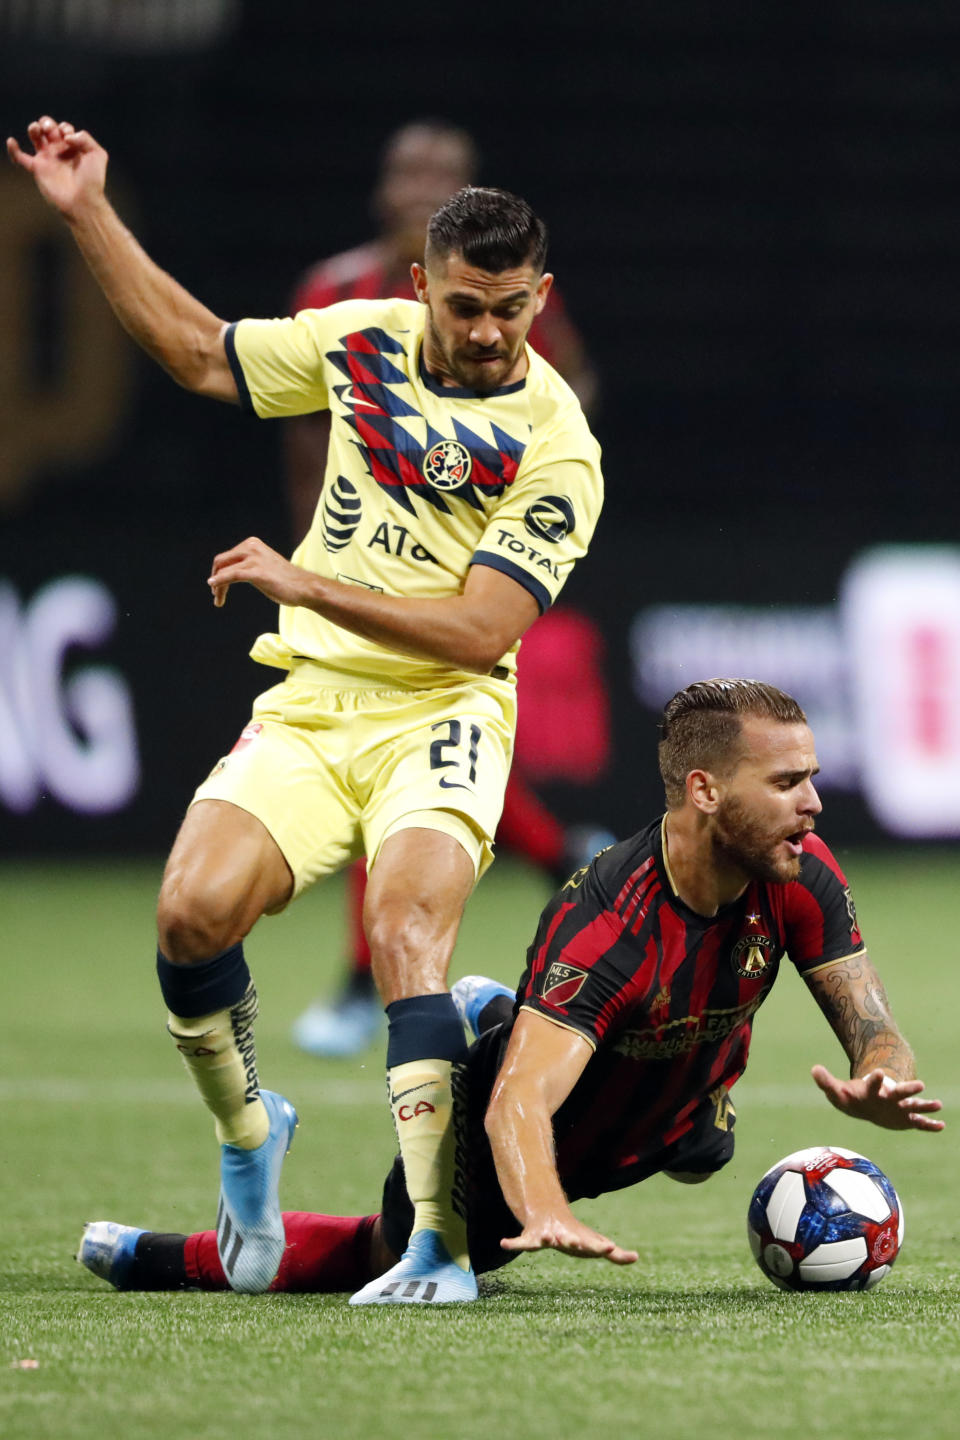 Club America forward Henry Martin (21) takes the ball away from Atlanta United defender Leandro Gonzalez (5) during the first half of a Campeones Cup soccer match Wednesday, Aug. 14, 2019, in Atlanta. (AP Photo/John Bazemore)